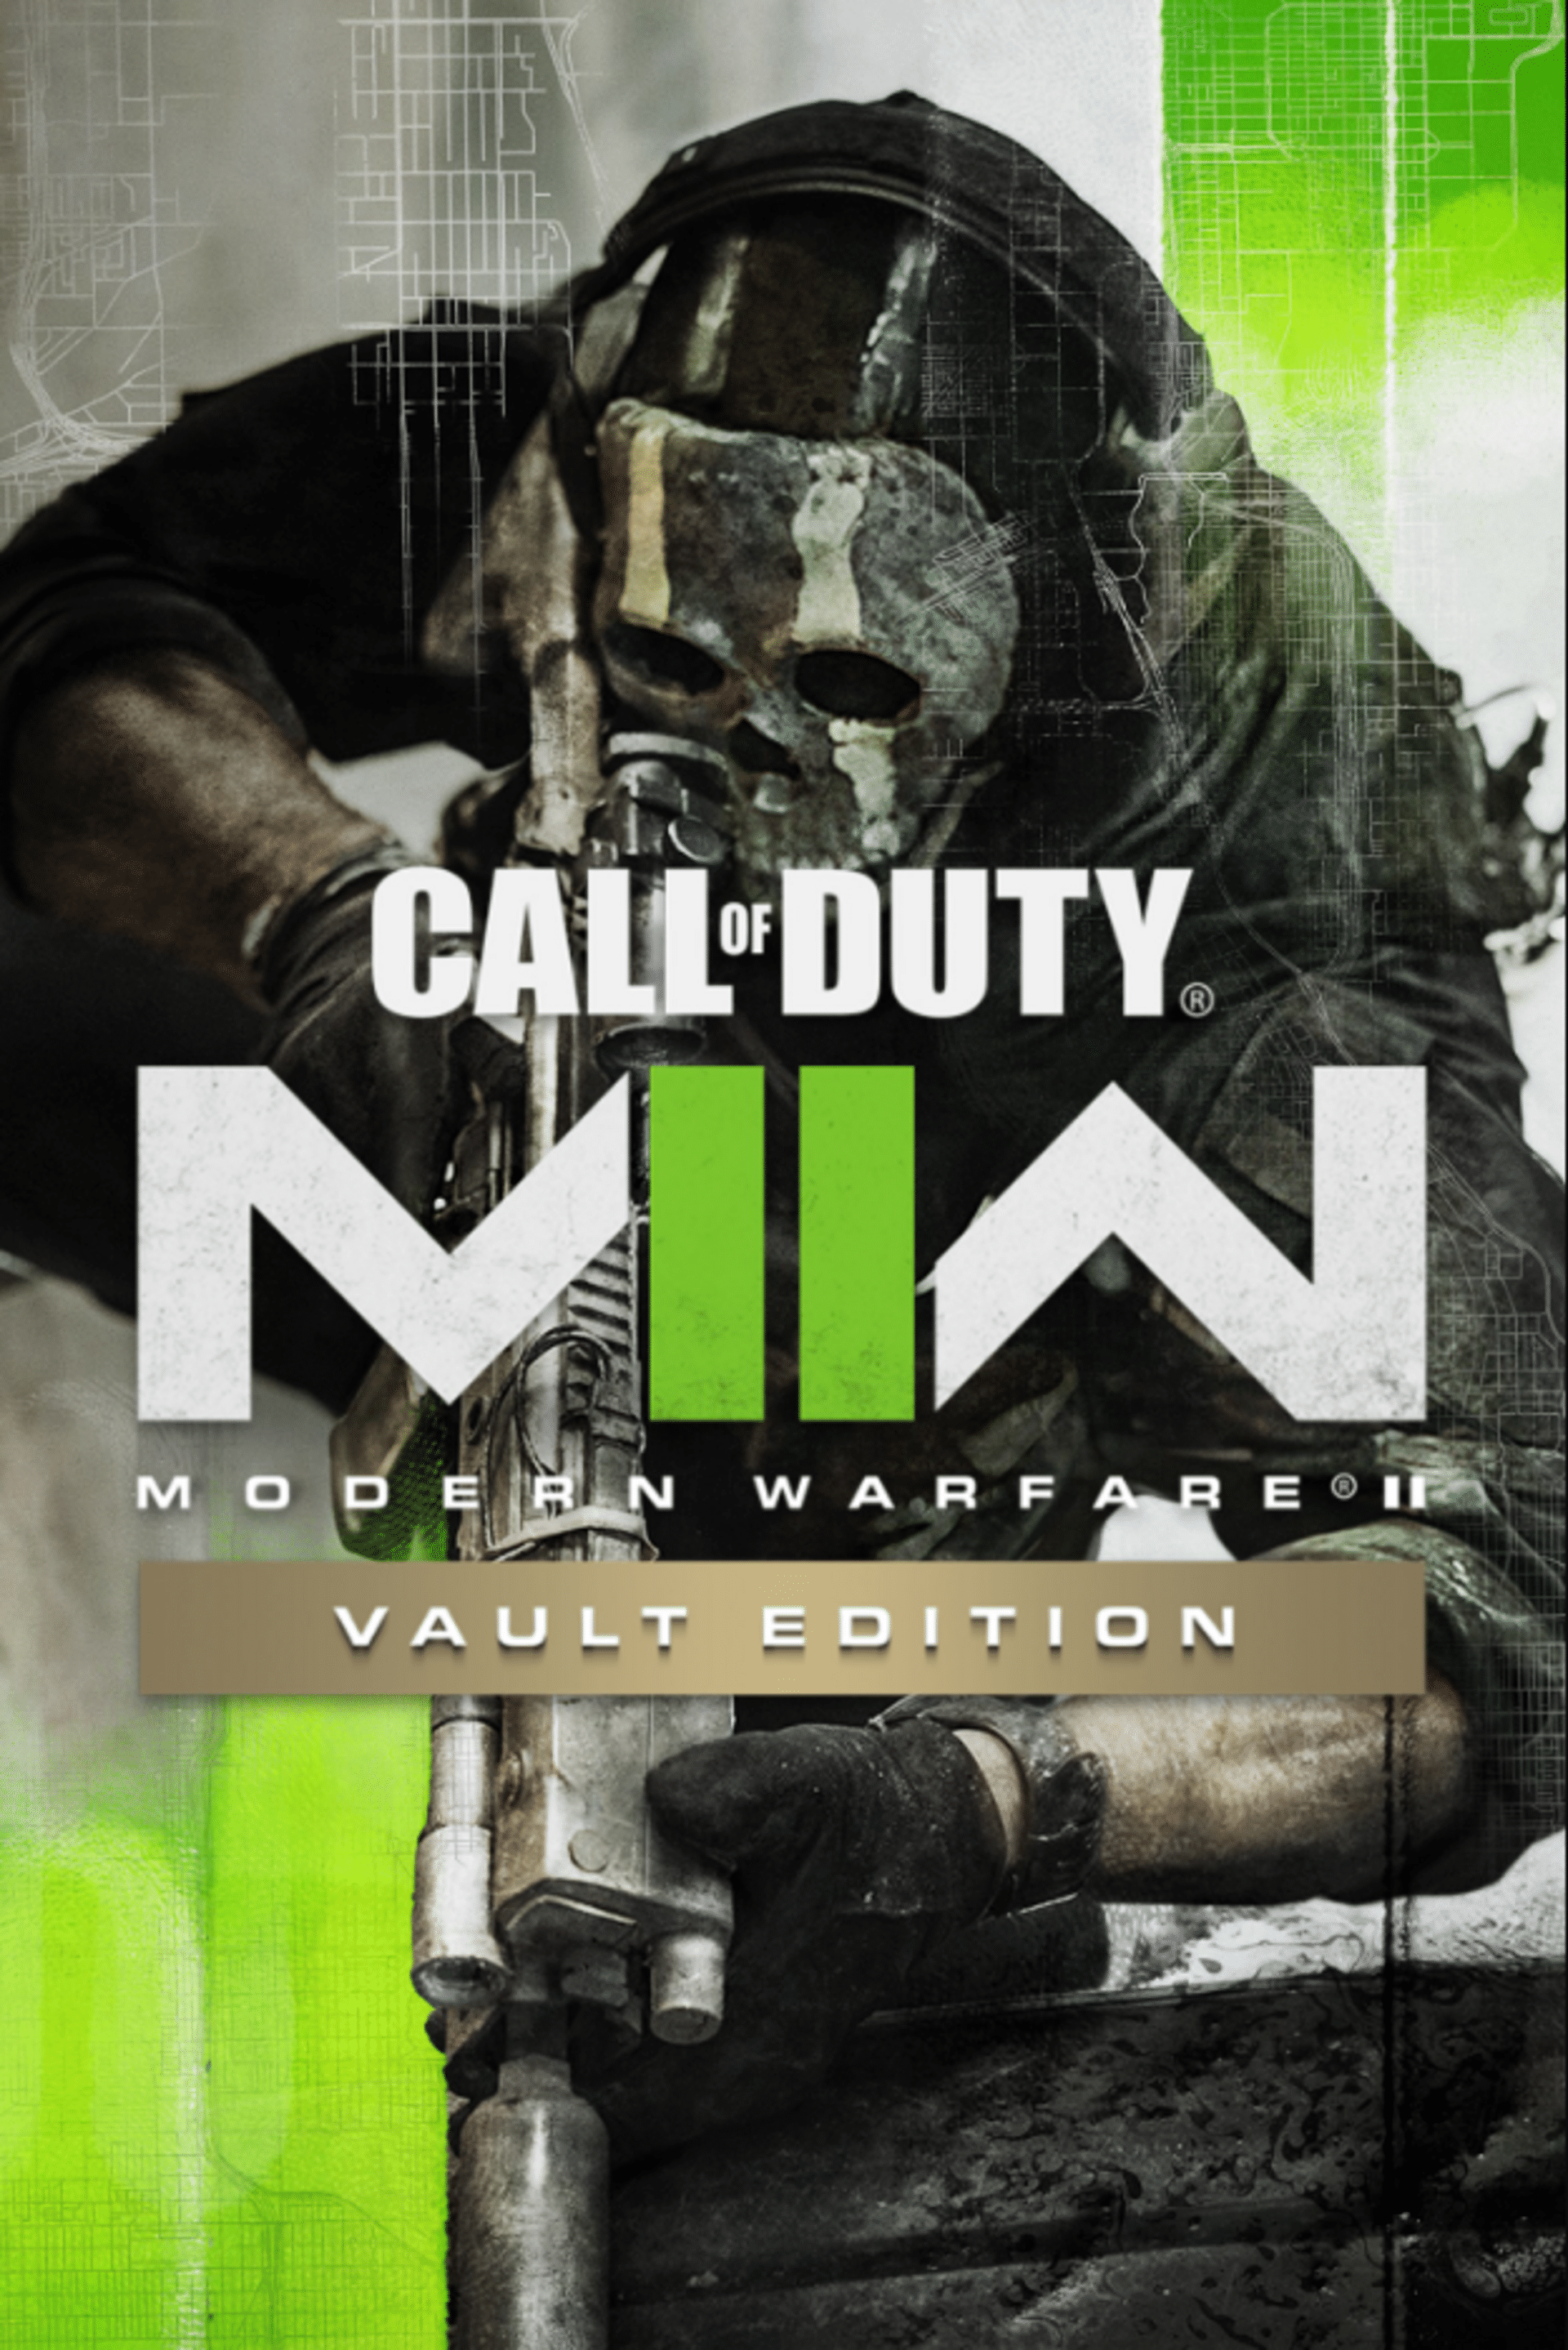 Do THIS if you bought the Steam version of Modern Warfare 2 Vault Edition!!  